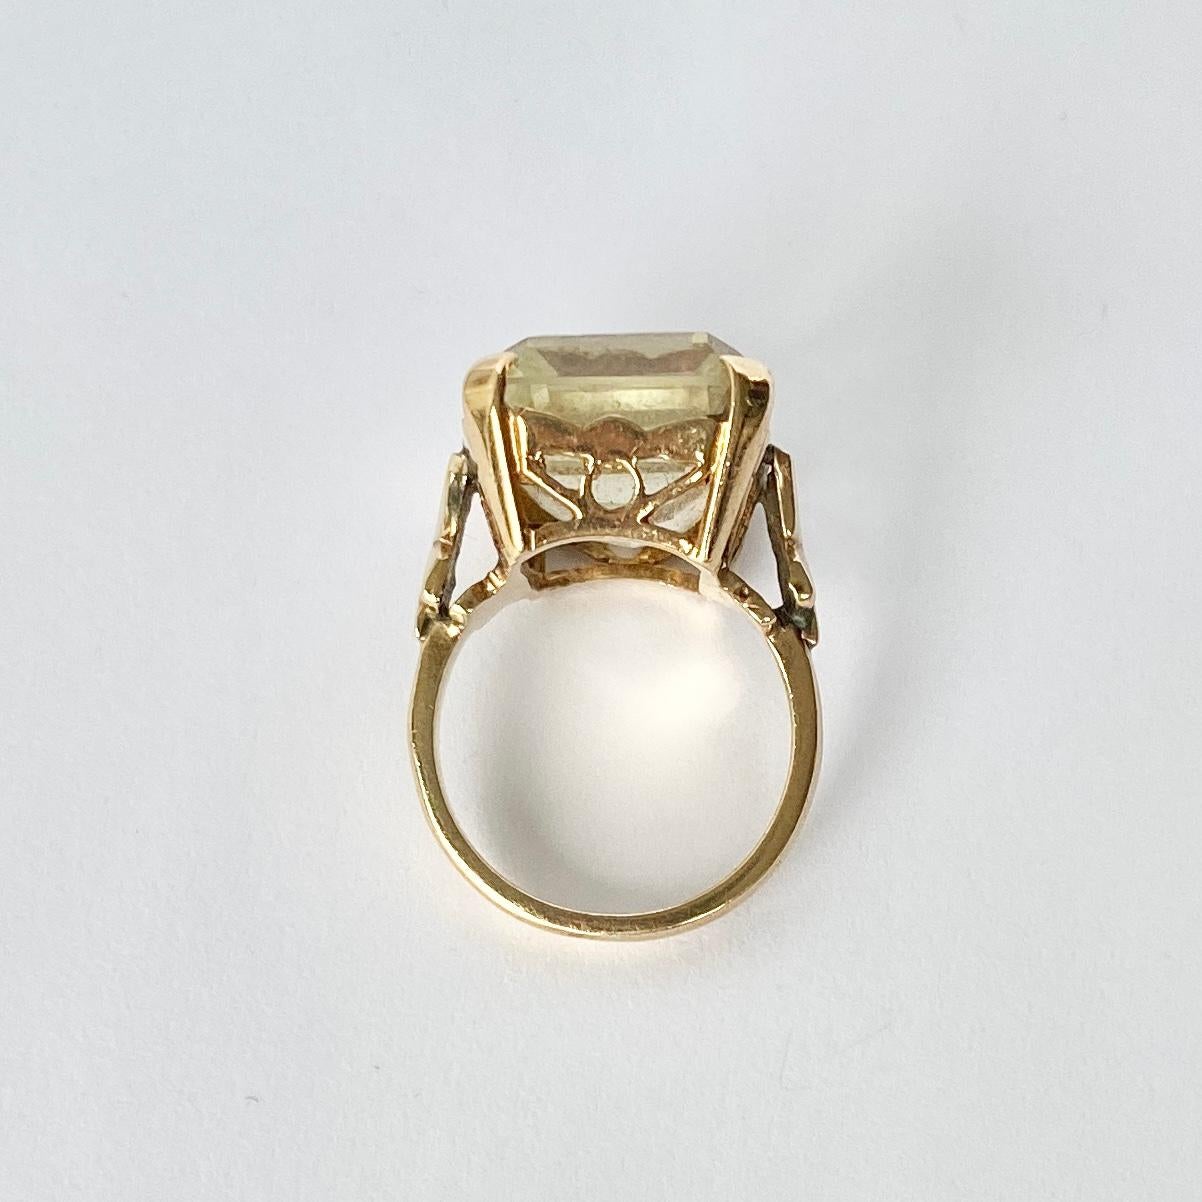 The gorgeous citrine stone in this ring is a lemon yellow colour and is set in simple claws. The gallery is ornate and all modelled in 9carat gold. 

Ring Size: J 1/2 or 5 
Stone Dimensions: 18x13mm
Height Off Finger: 10mm 

Weight: 7.4g